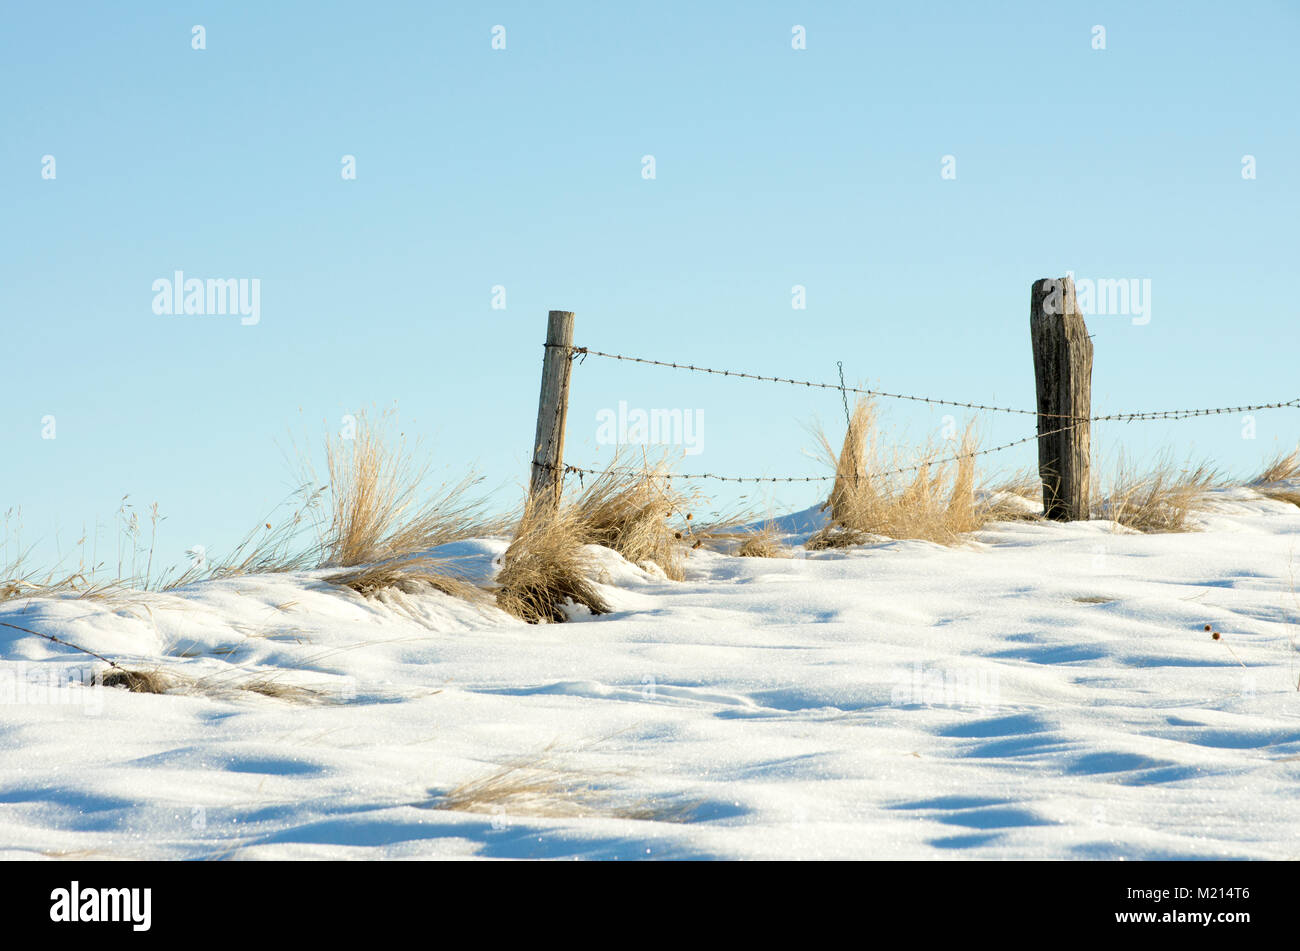 Alberta, Canada.  Old barbed wire fence on the Canadian Prairies in winter along a snowy ridge with yellow grasses. Stock Photo